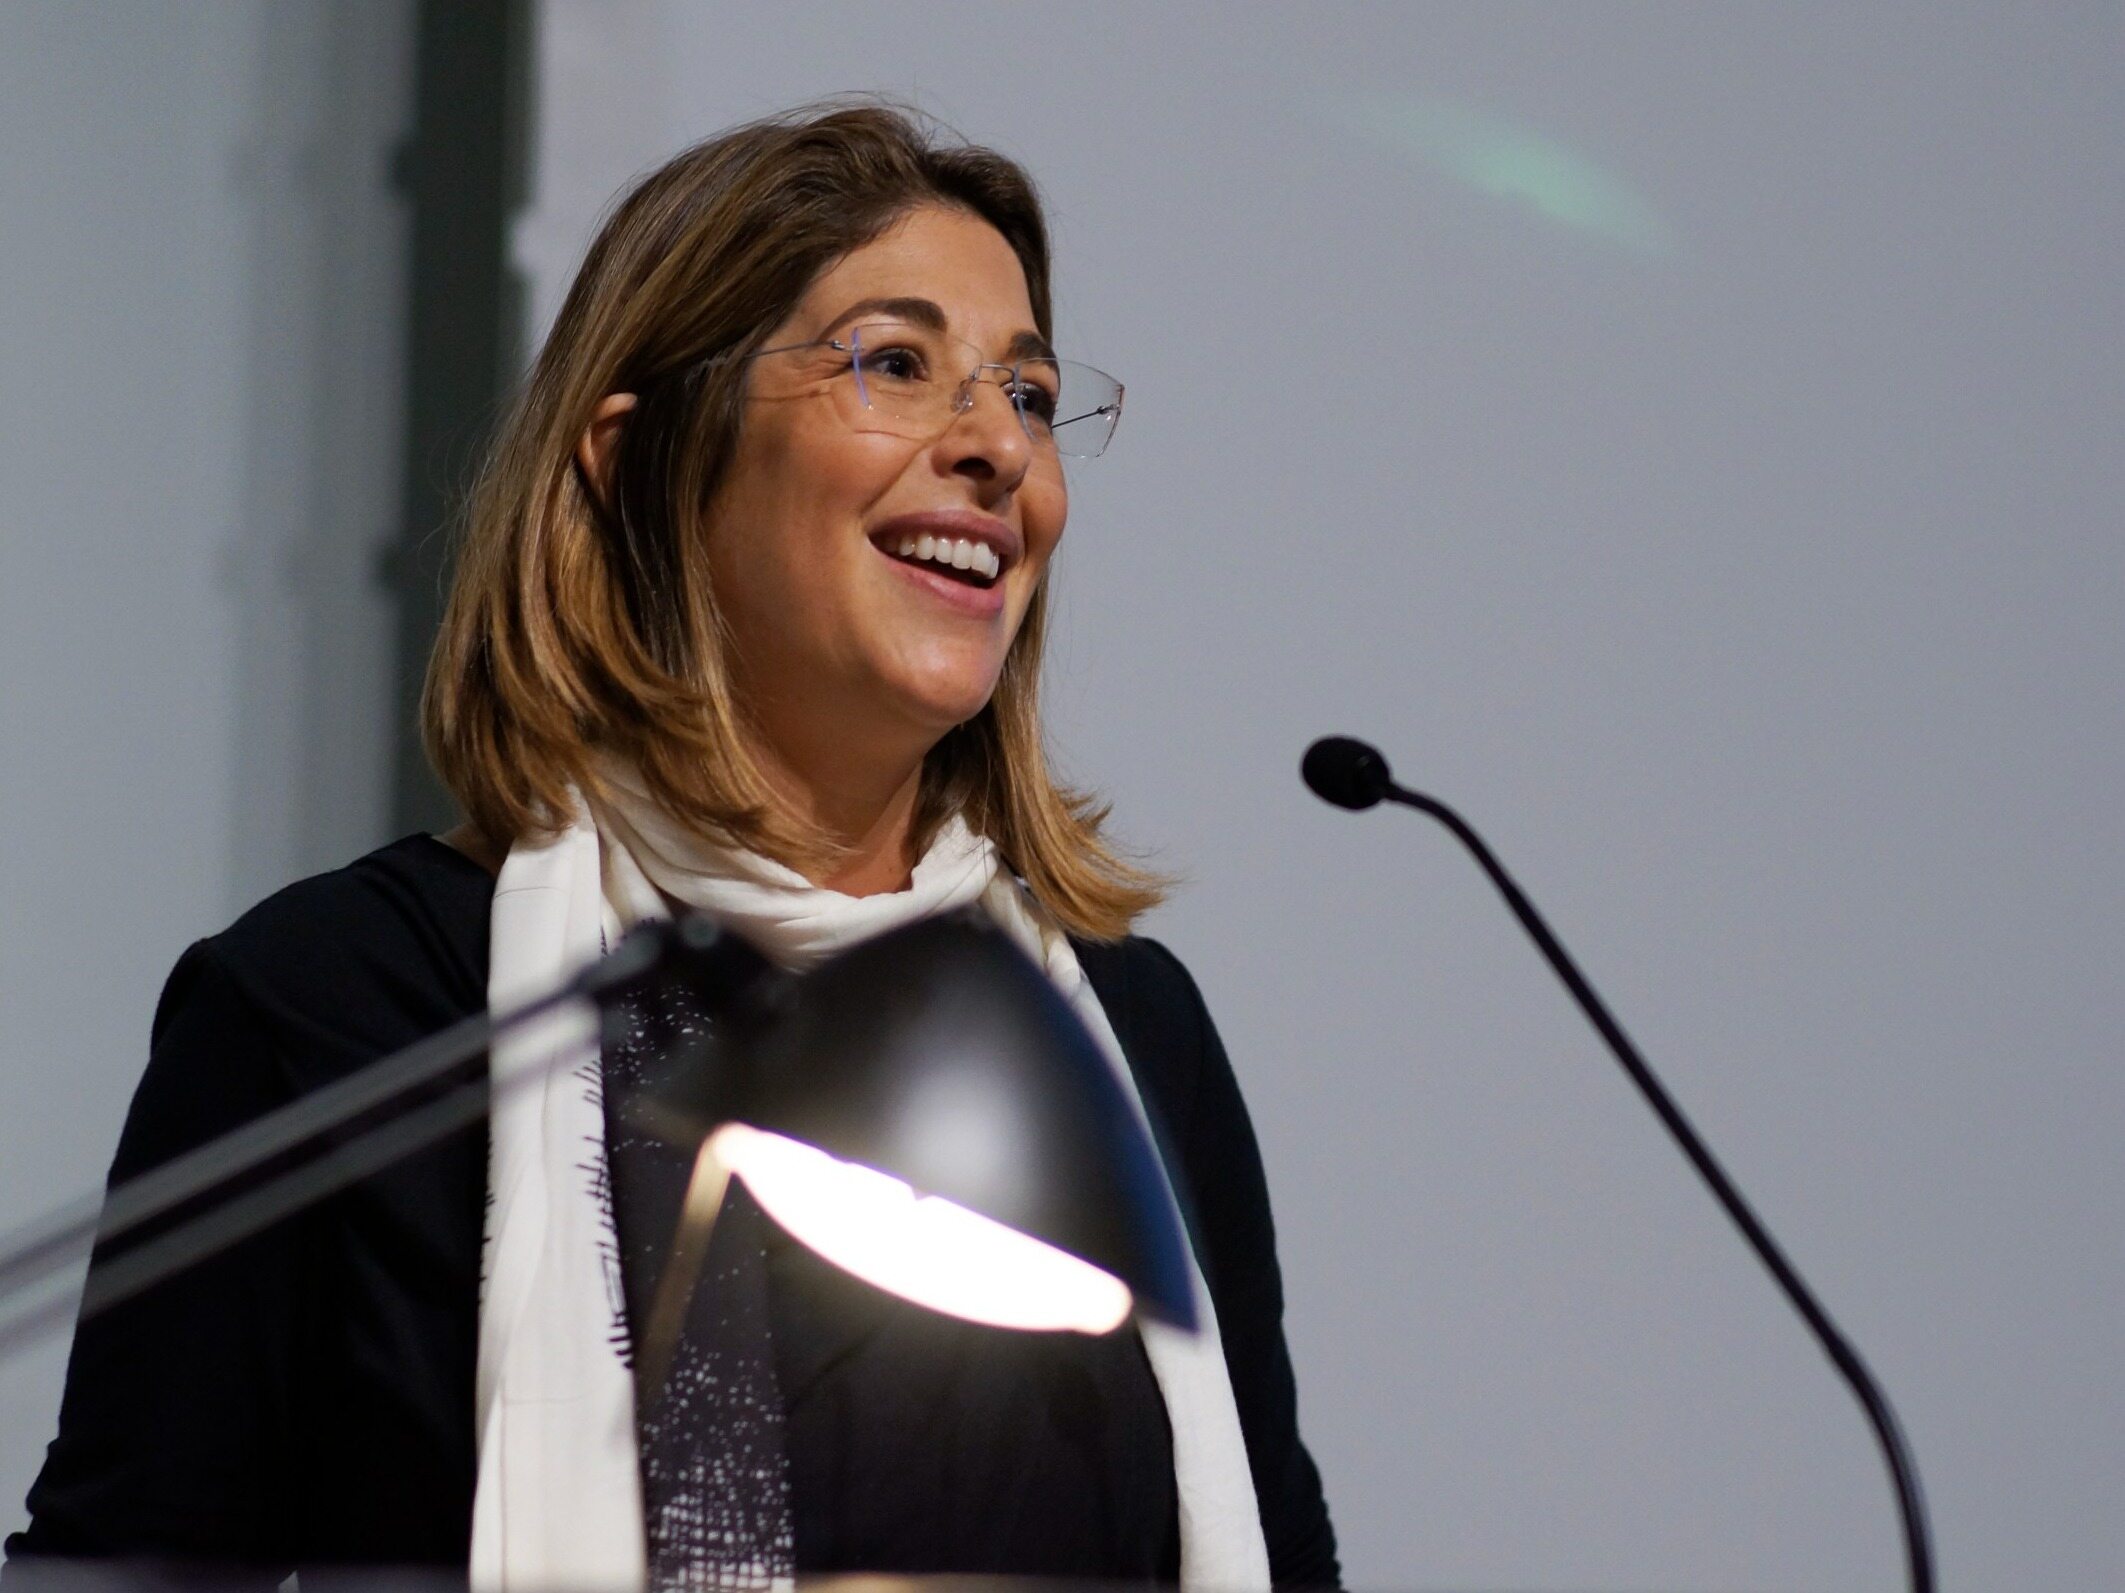 Przegalińska for "Wprost": The extraordinary case of Naomi Klein.  They confuse her with a conspiracy theorist